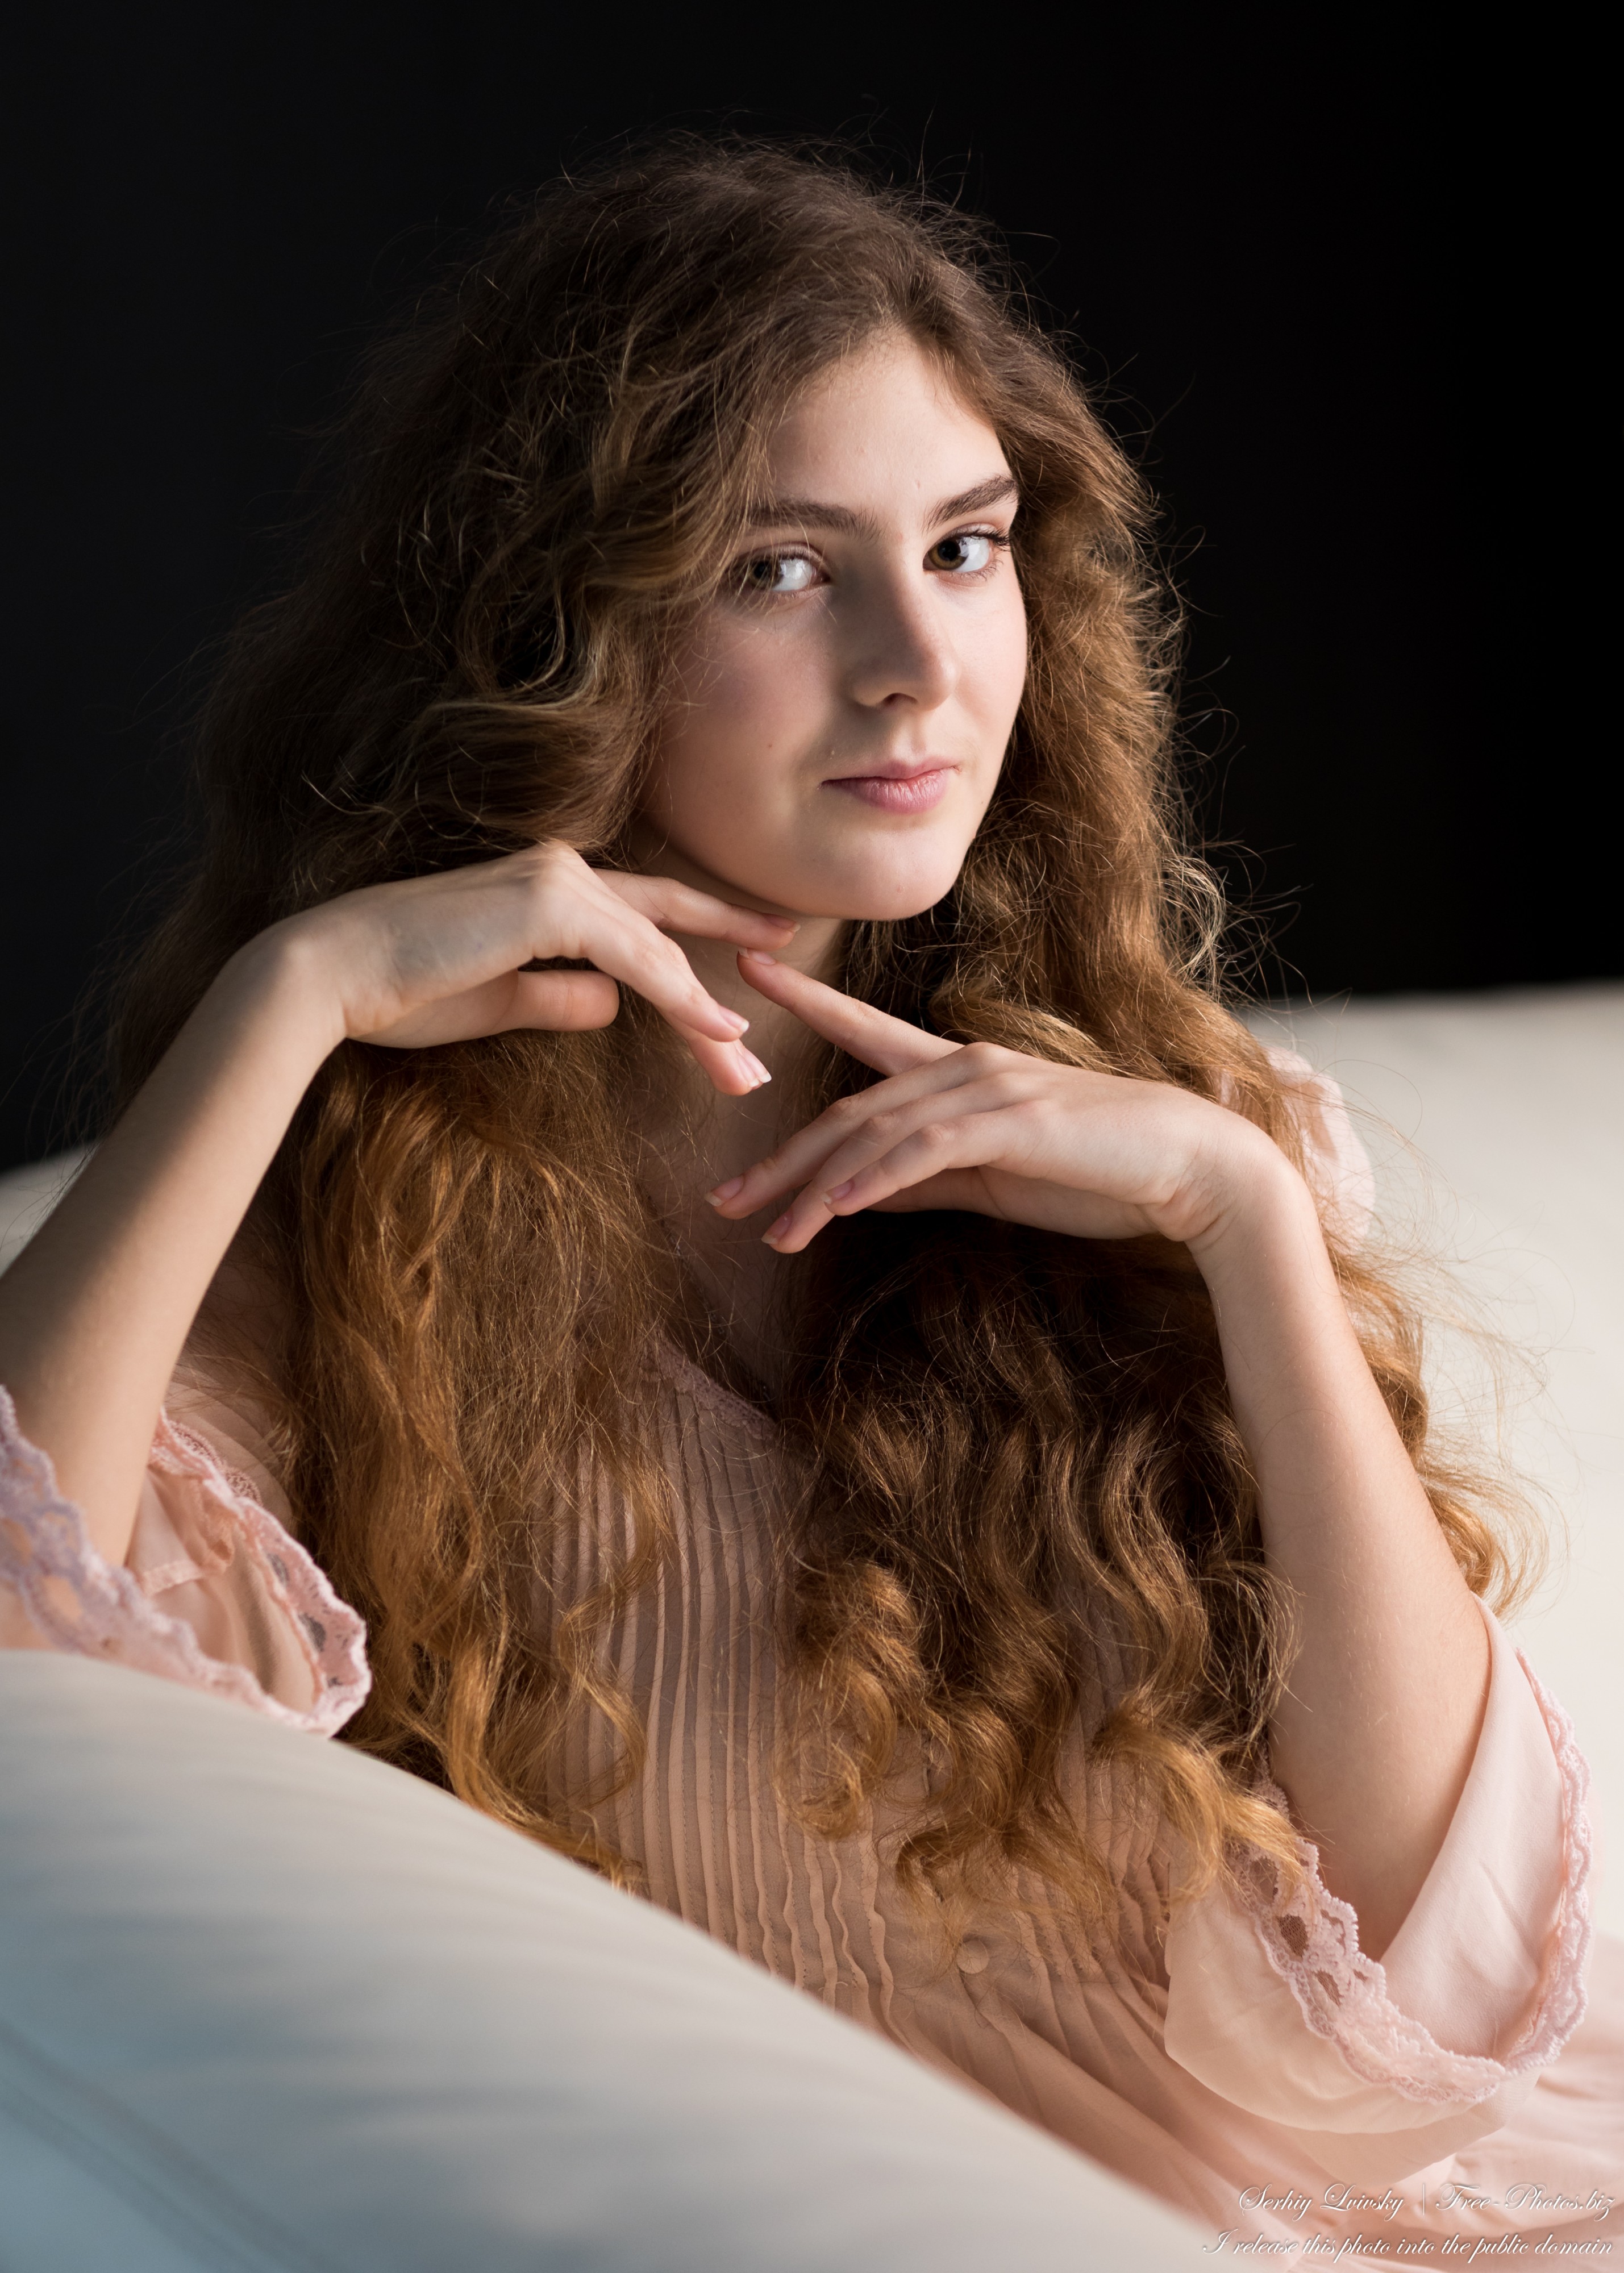 https://www.free-photos.biz/images/people/girls/thumb/kornelia_a_15-year-old_girl_with_curly_hair_photographed_in_march_2023_by_serhiy_lvivsky_15.jpg